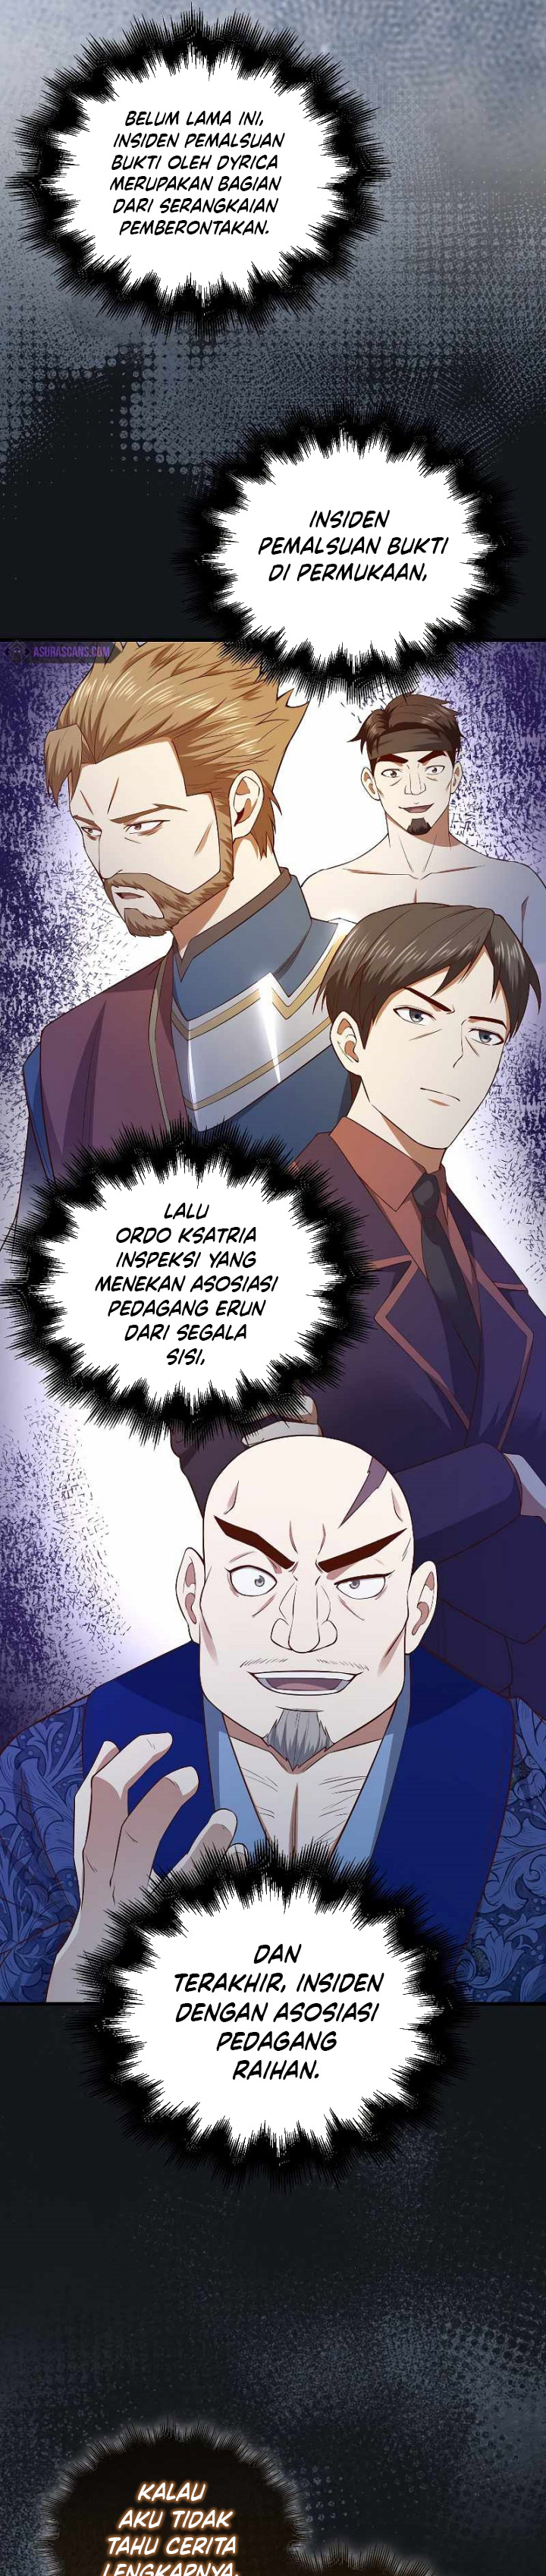 The Lord’s Coins Aren’t Decreasing?! Chapter 103